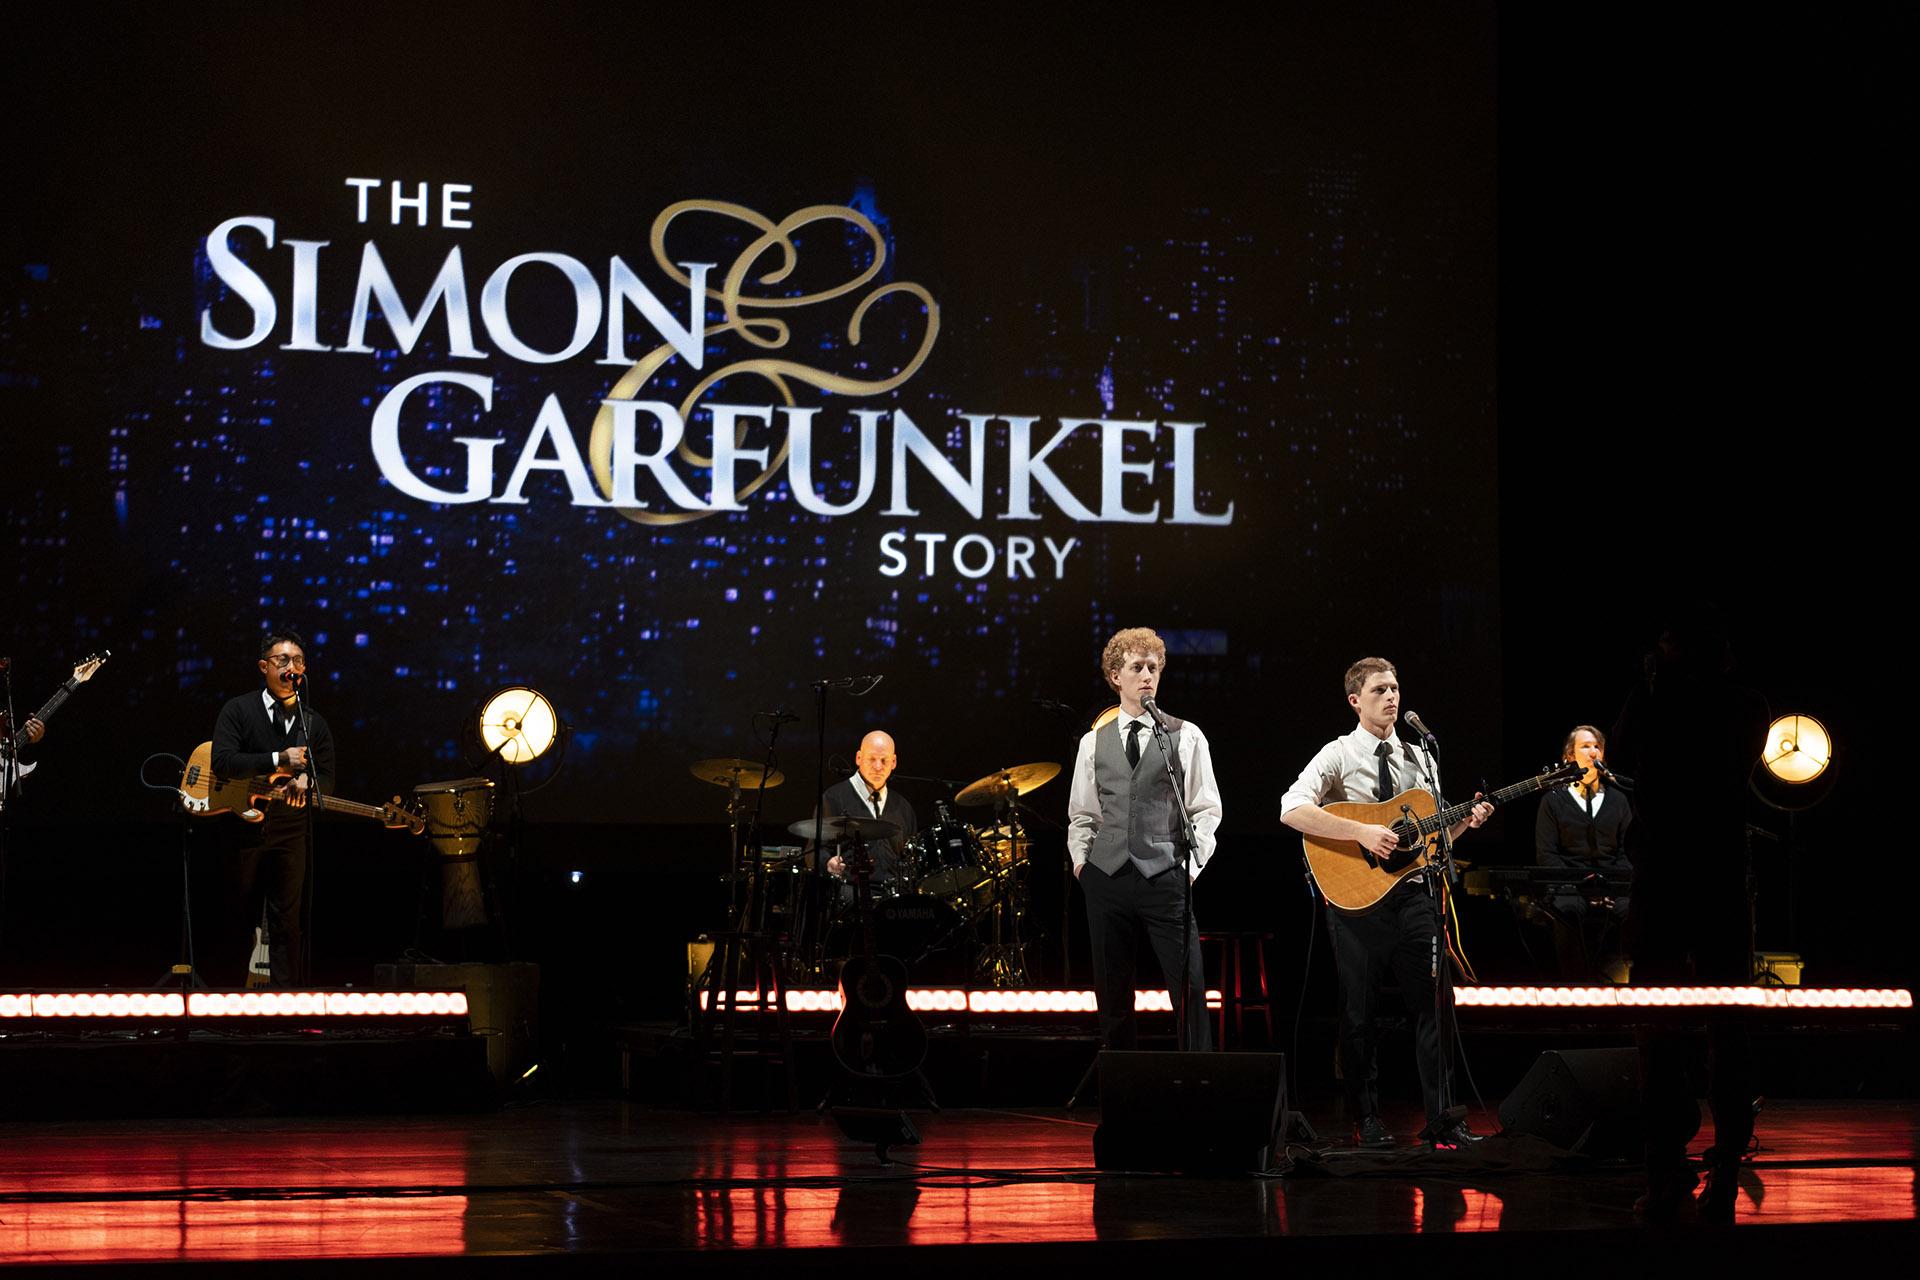 Ben Cooley (left) and Taylor Bloom perform in “The Simon & Garfunkel Story.” (Photo by Lane Peters)